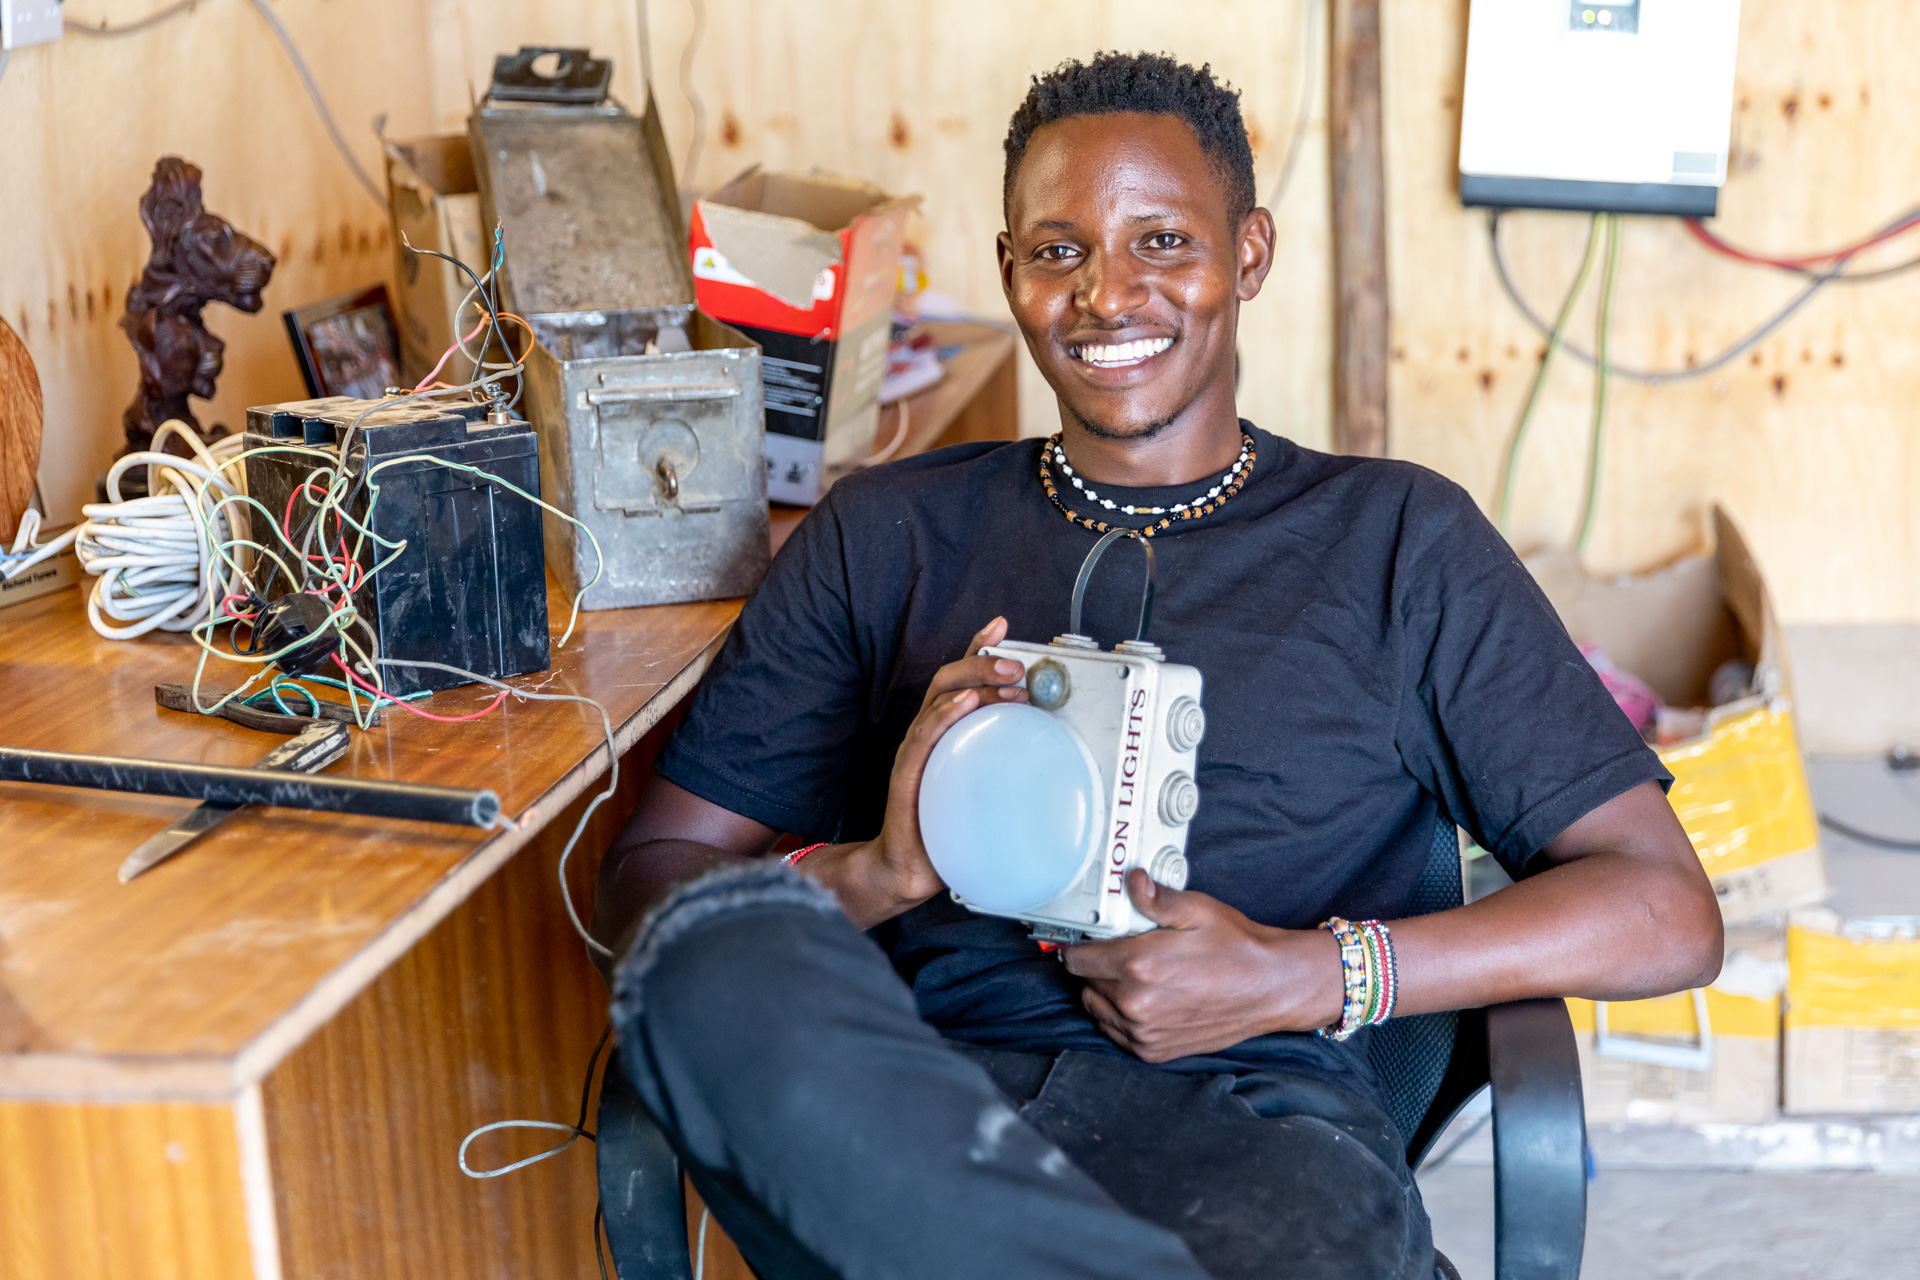 Kenya’s Richard Turere, an innovator and entrepreneur, named finalist for the Young Inventors Prize